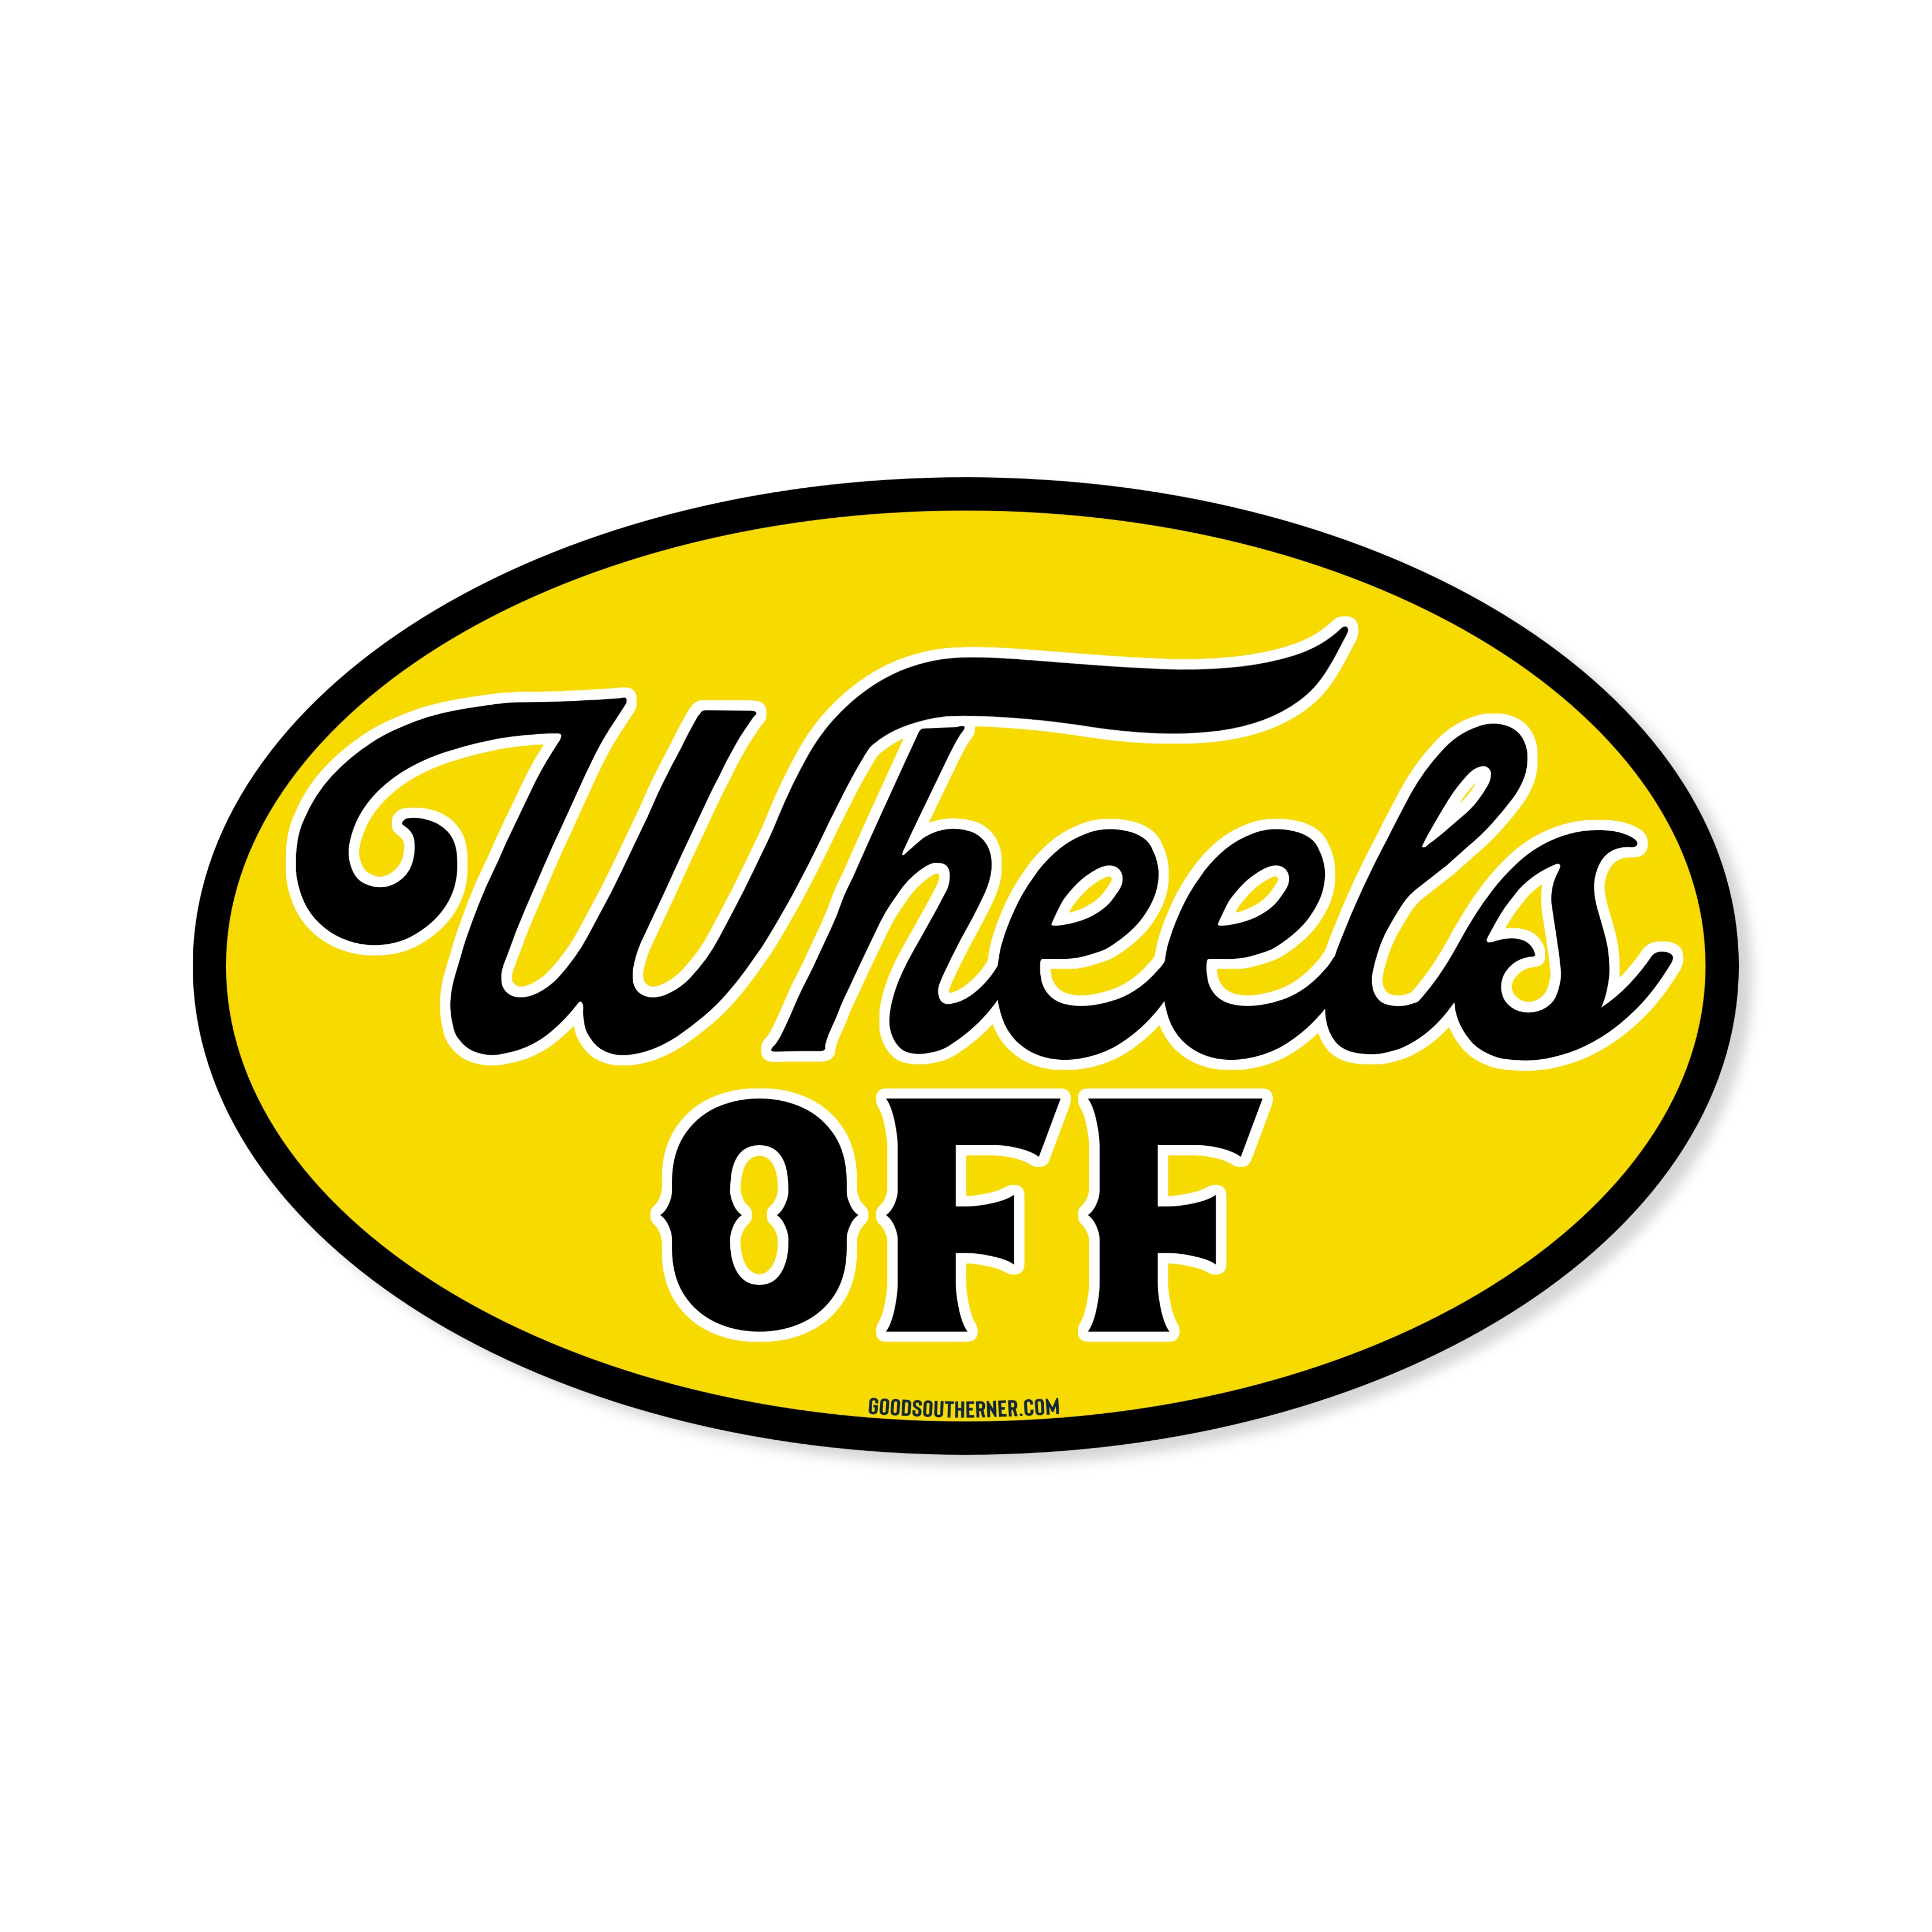 Buy Wholesale Wheels Off Sticker by Good Southerner | Handshake Marketplace